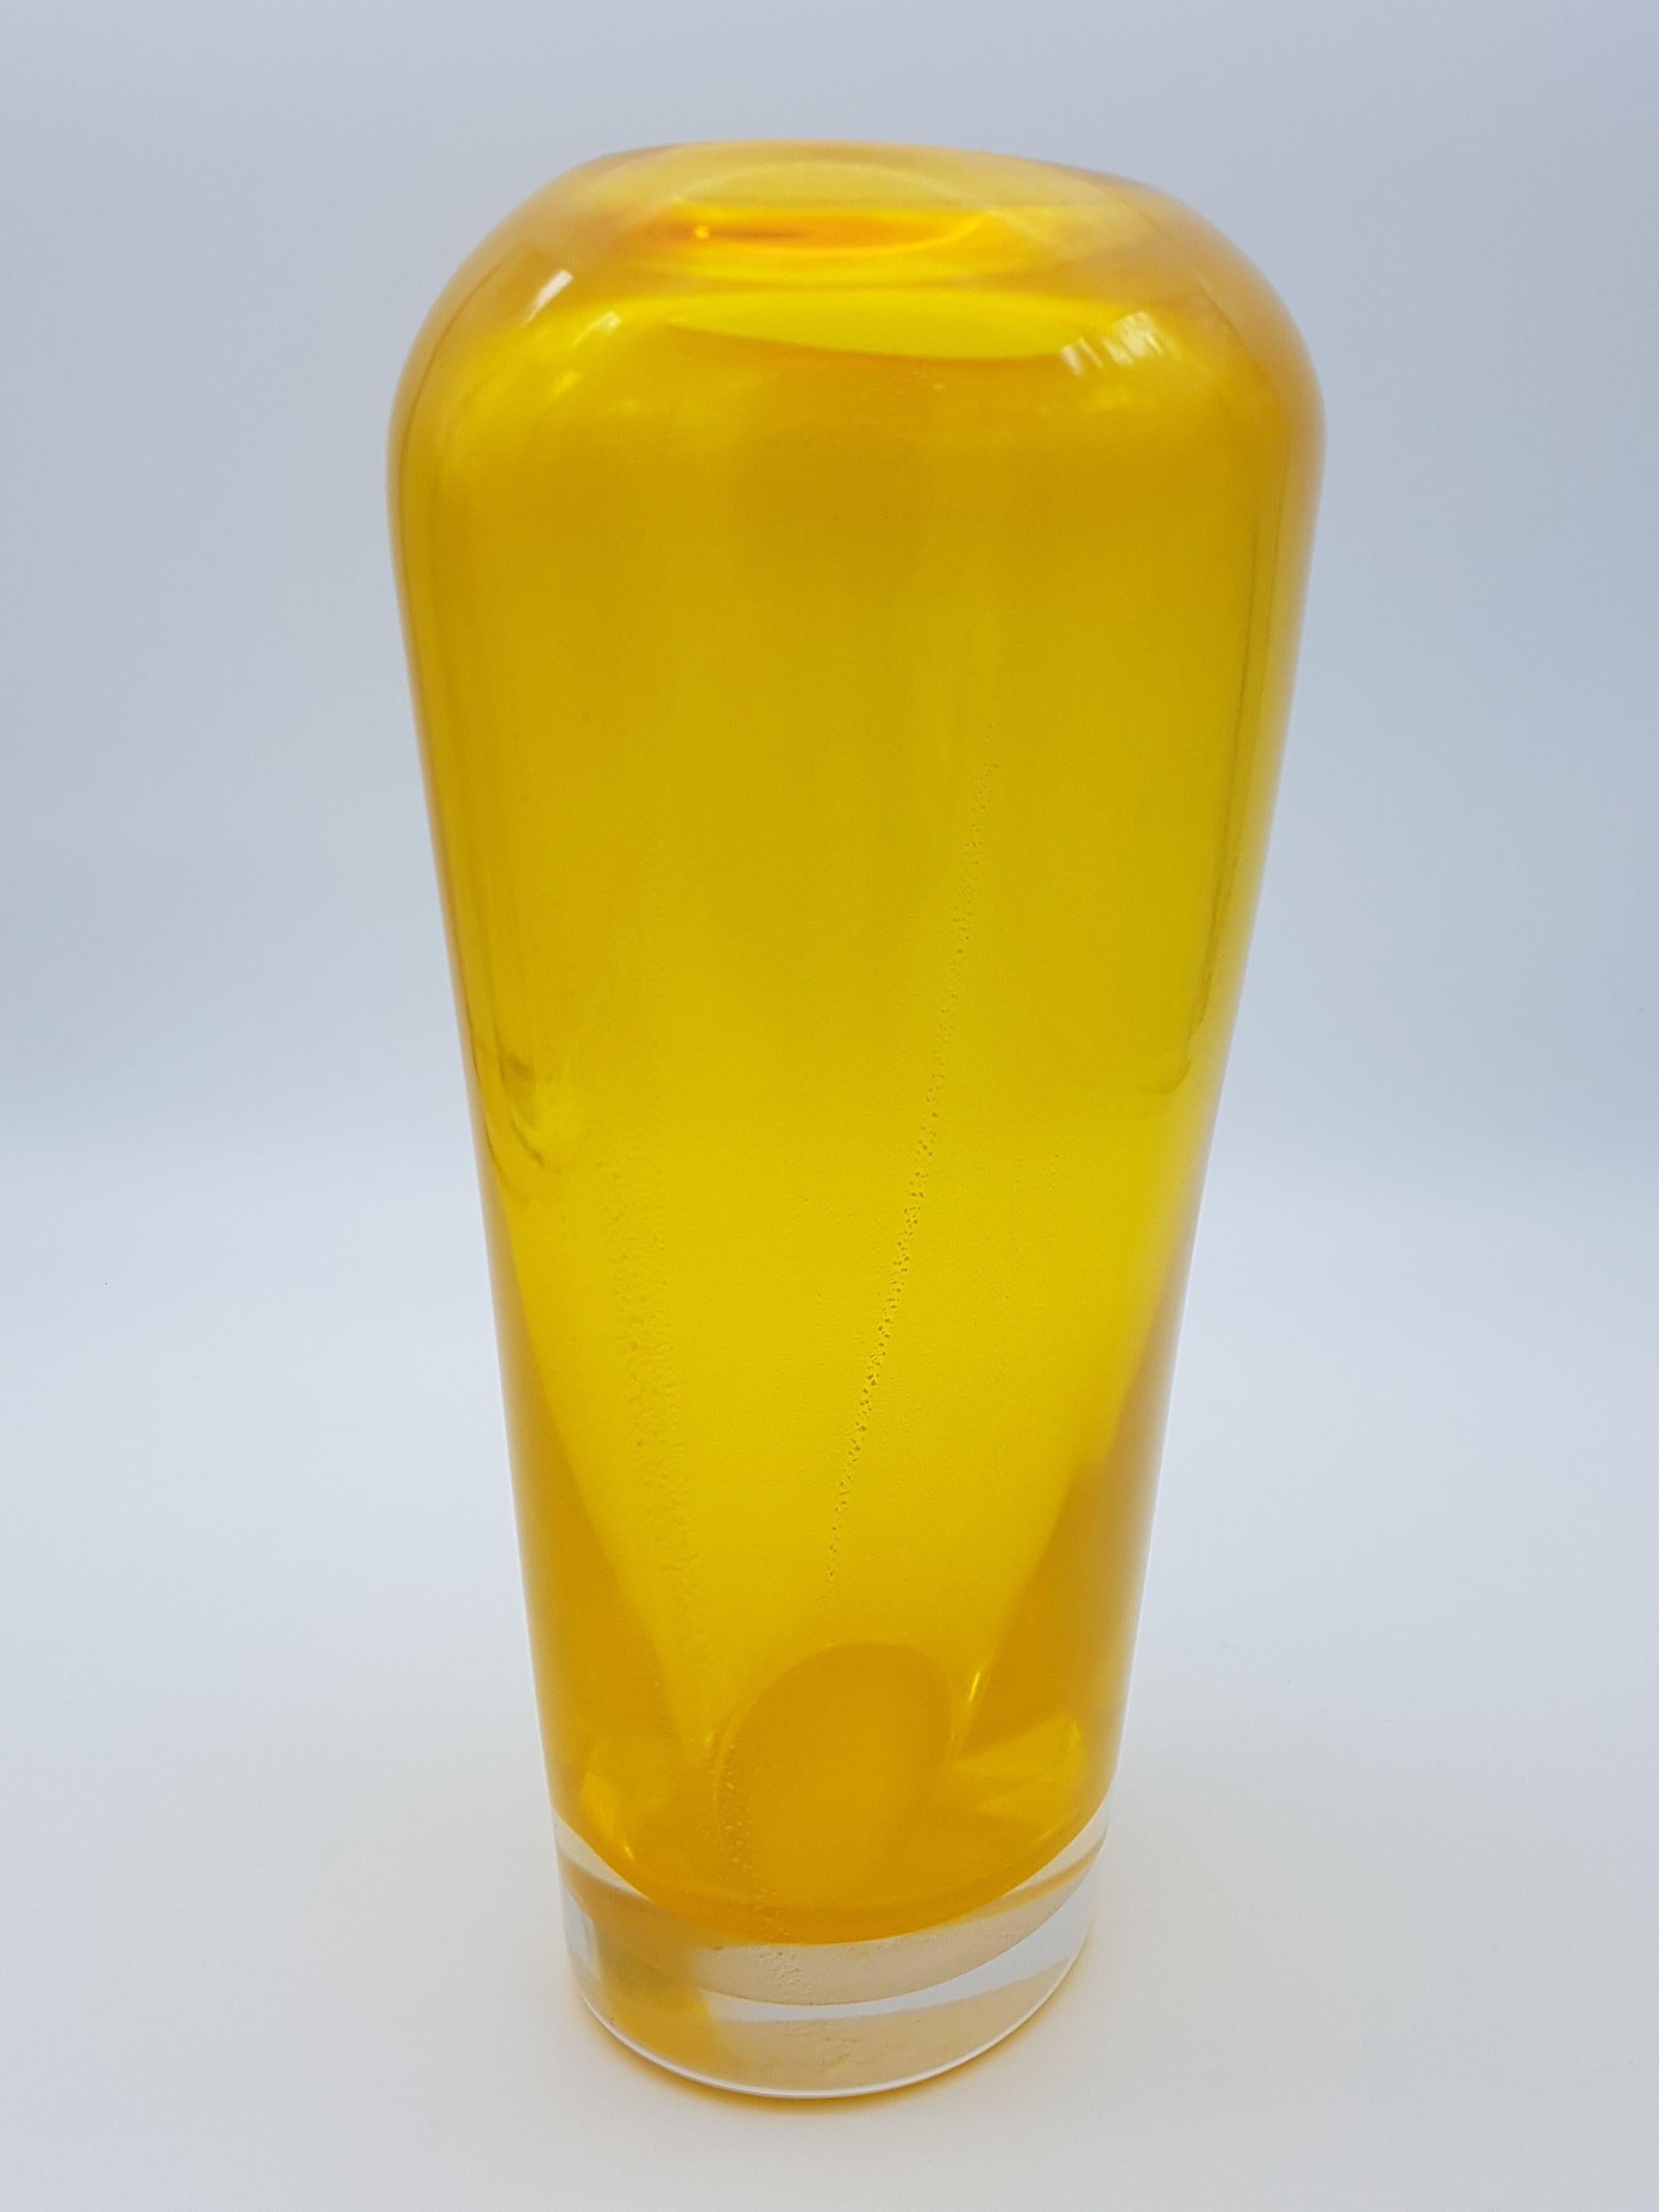 Modern Murano Glass Vase Gold Yellow Color by Cenedese, Late 1990s For Sale 1